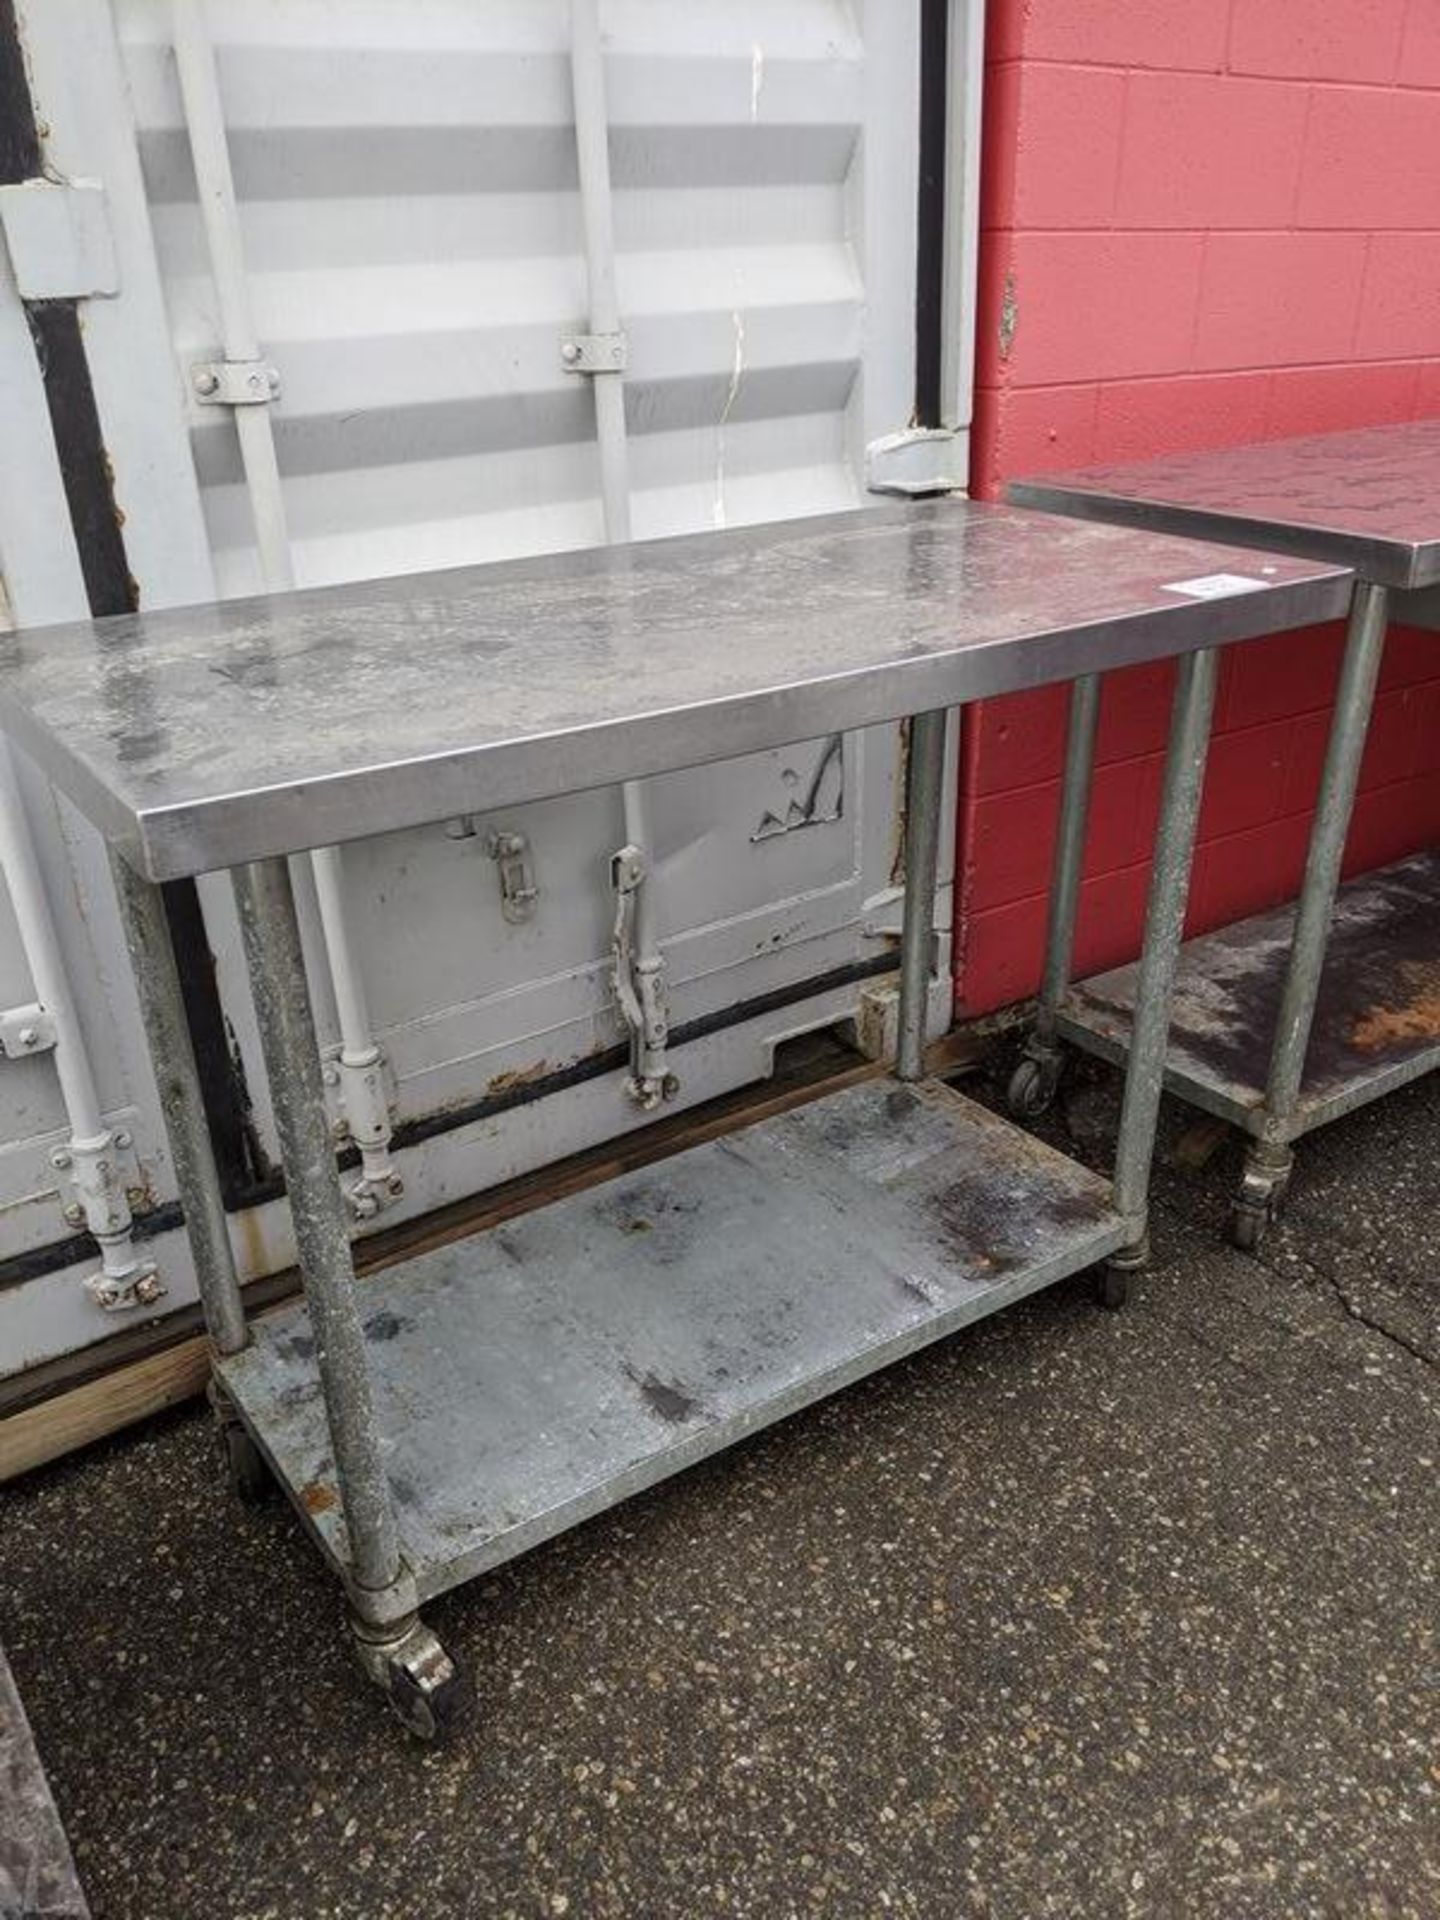 2 - 24 x 48" Stainless Steel Tables